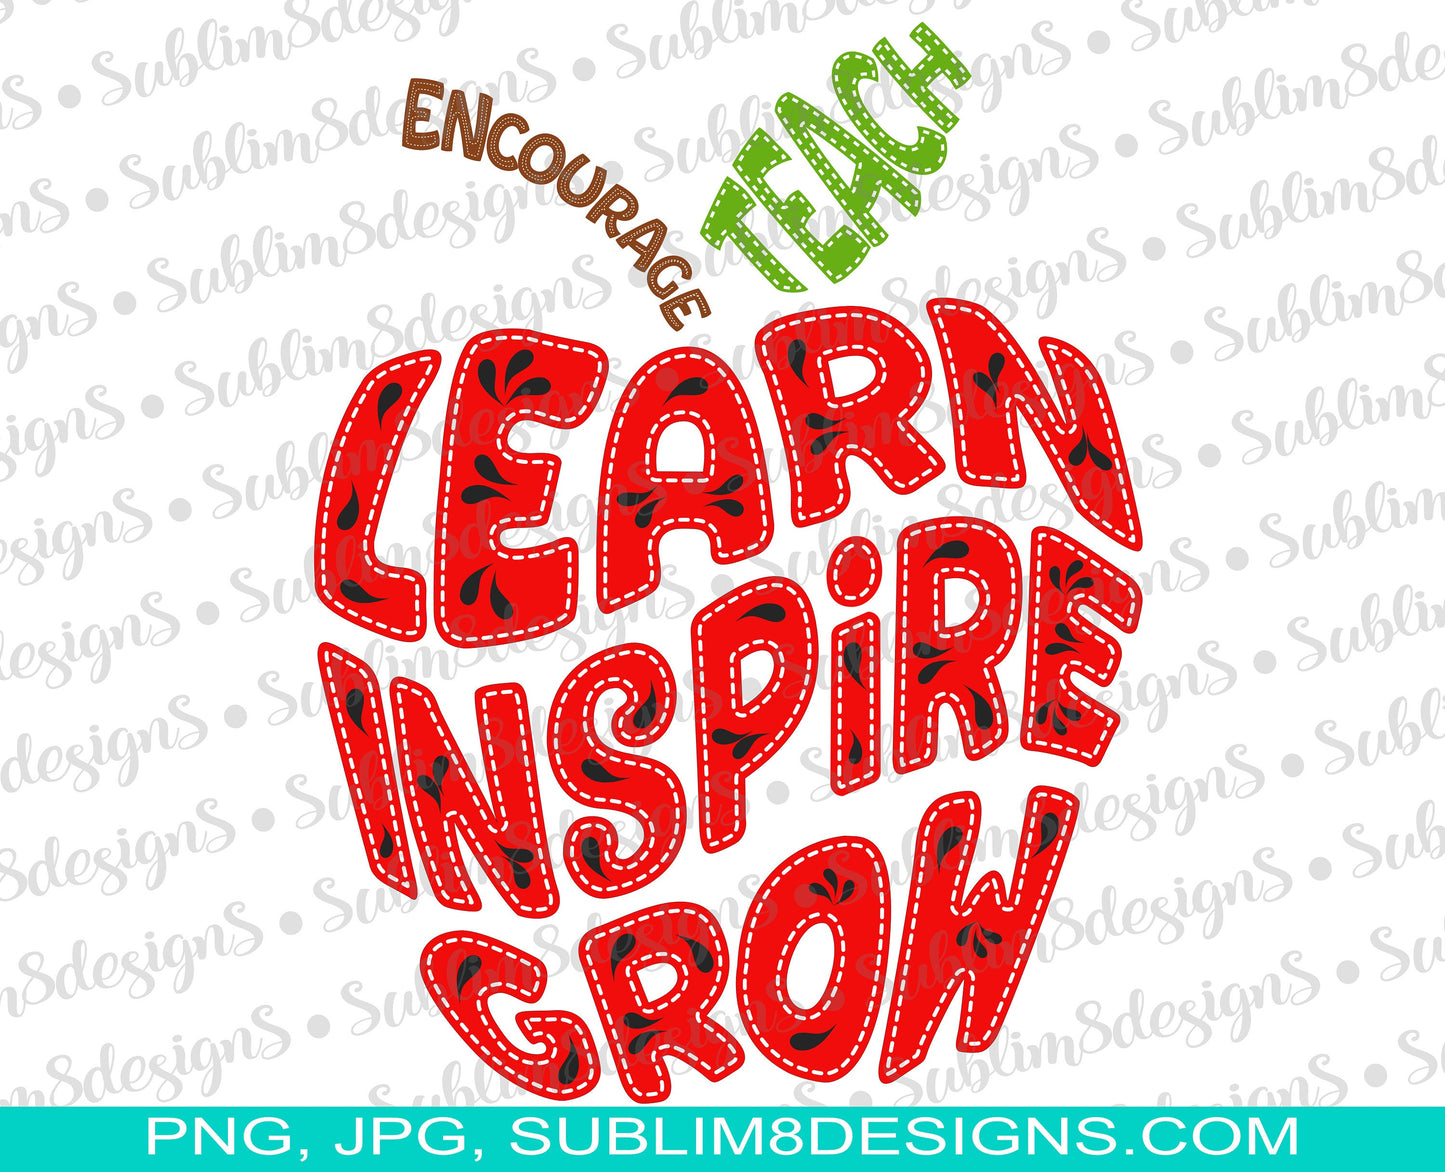 Learn Inspire Grow, PNG and JPG ONLY